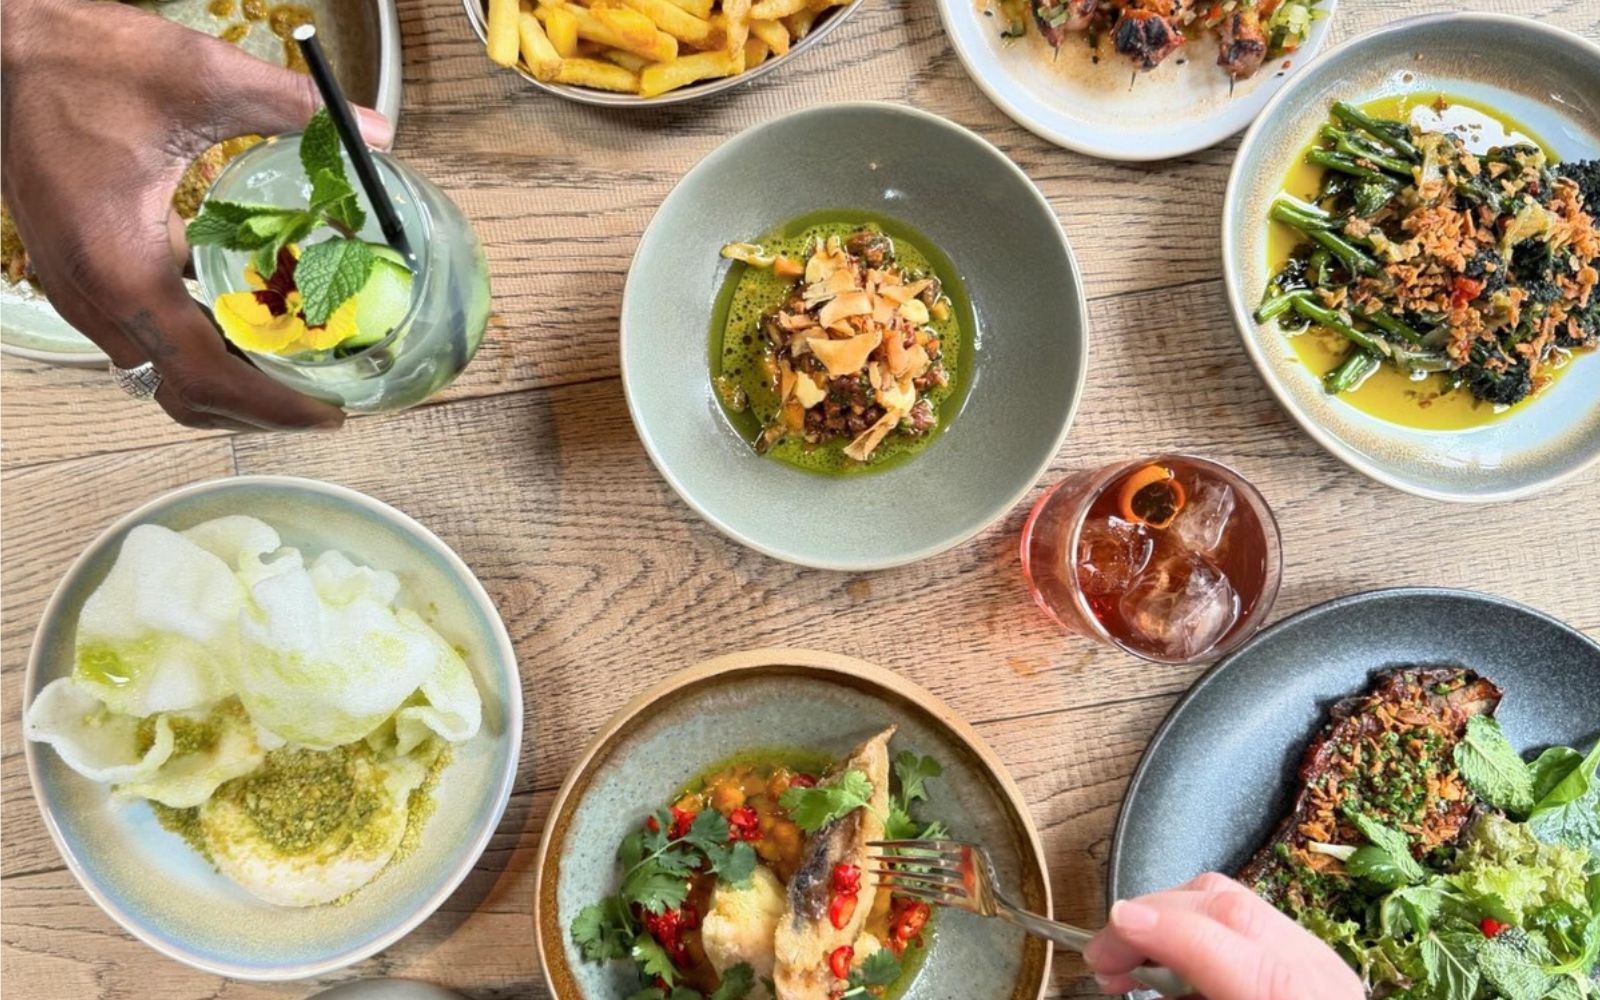 Ali Borer Is Heading Up the Kitchen at Light Bar | London News at a Glance